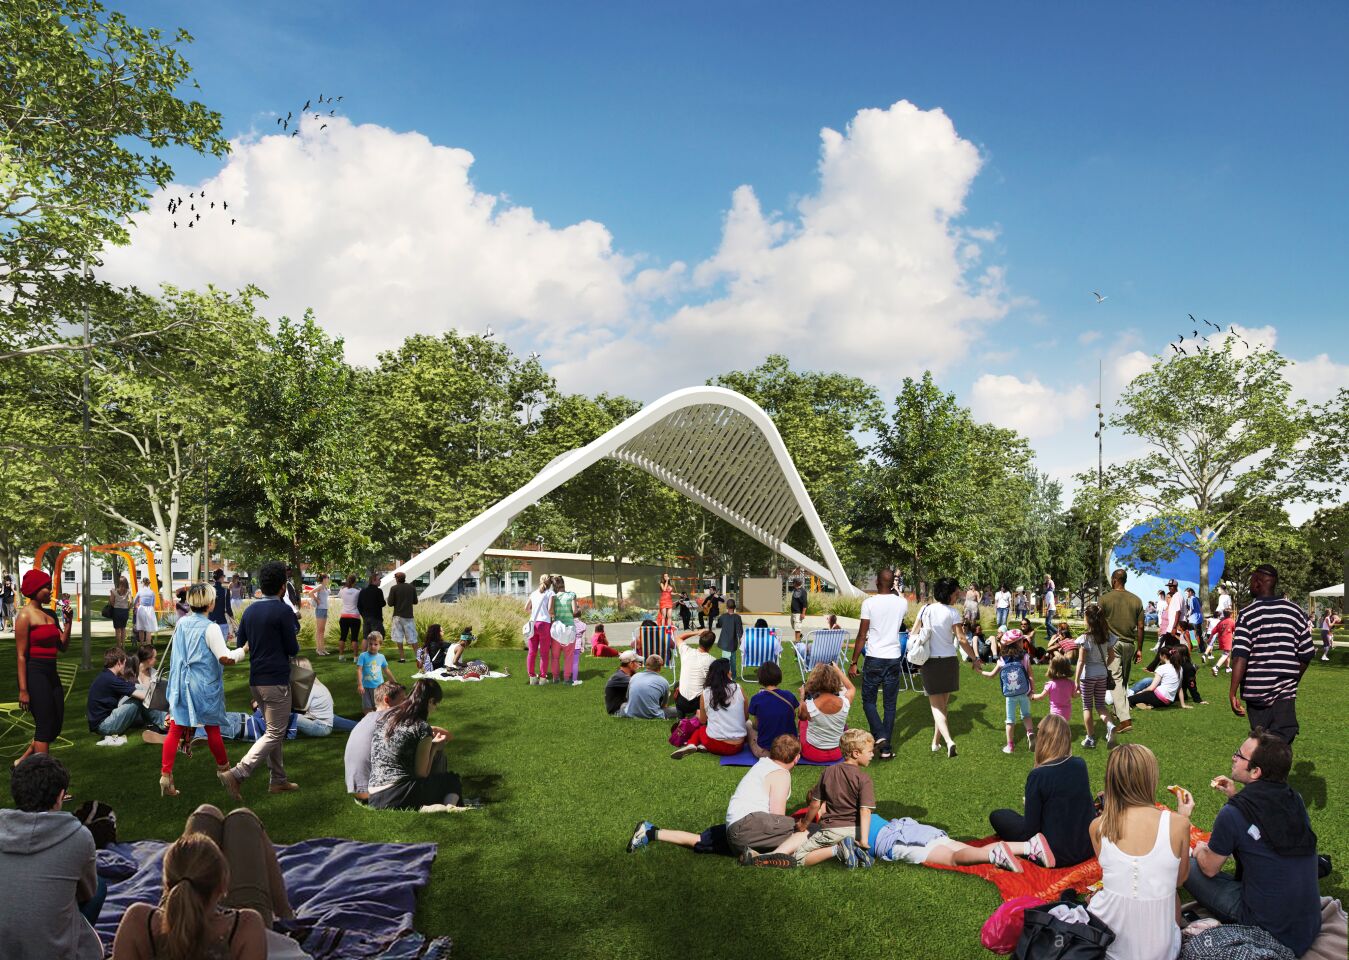 The 11,200 square-foot multi-purpose lawn is the focus of the west block, offering views of the performance pavilion and ample space for group events. The architectural shade feature has been scrapped from the plan because of budgetary constraints.